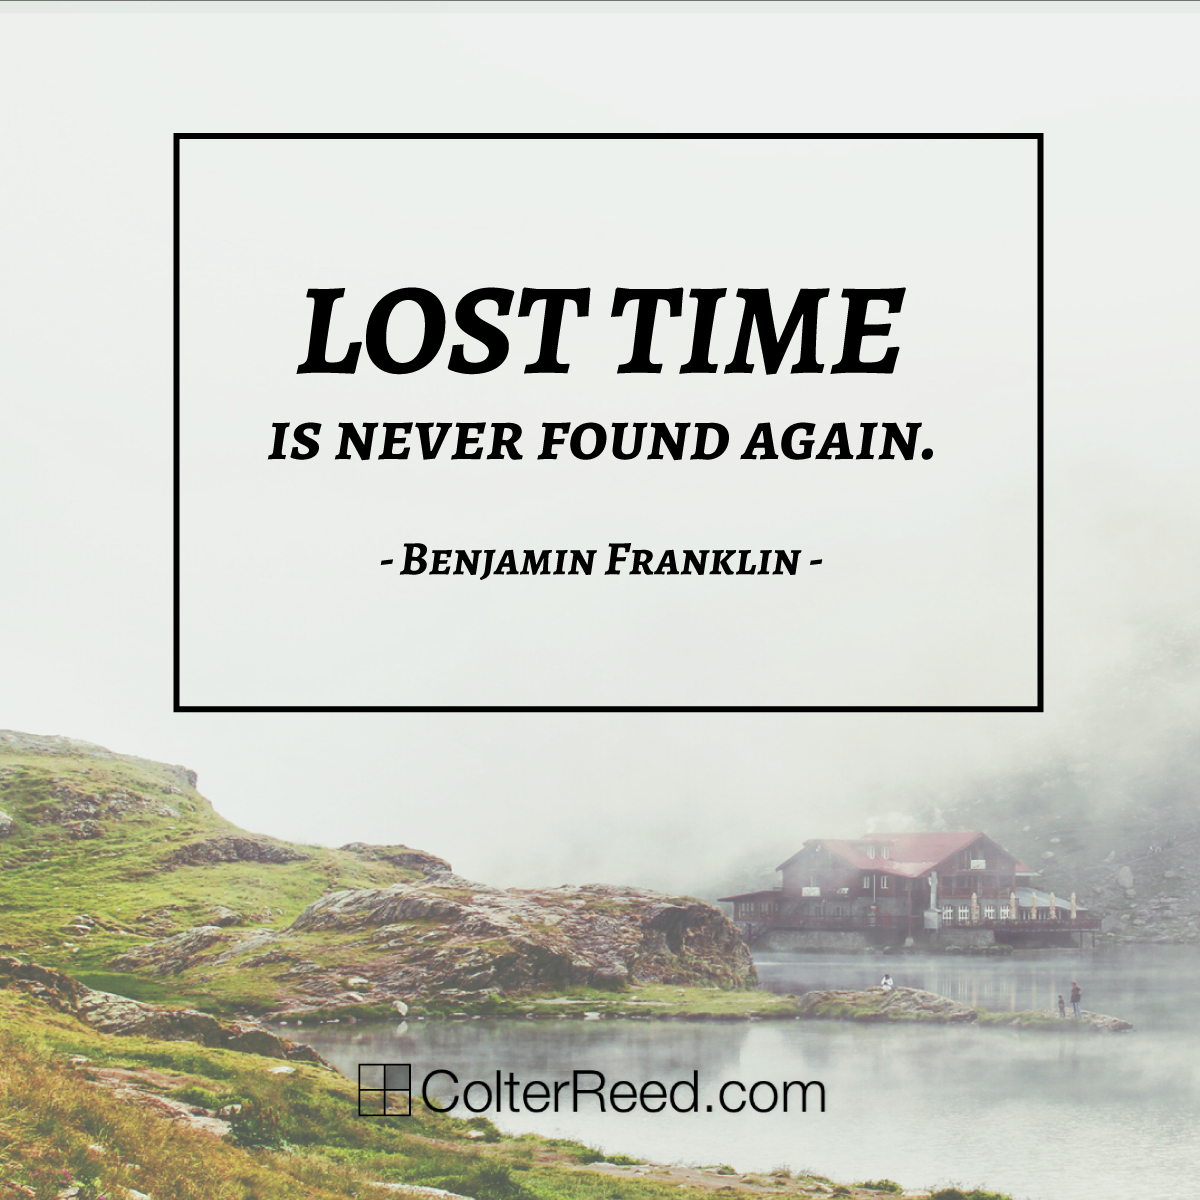 “Lost time is never found again.” —Ben Franklin